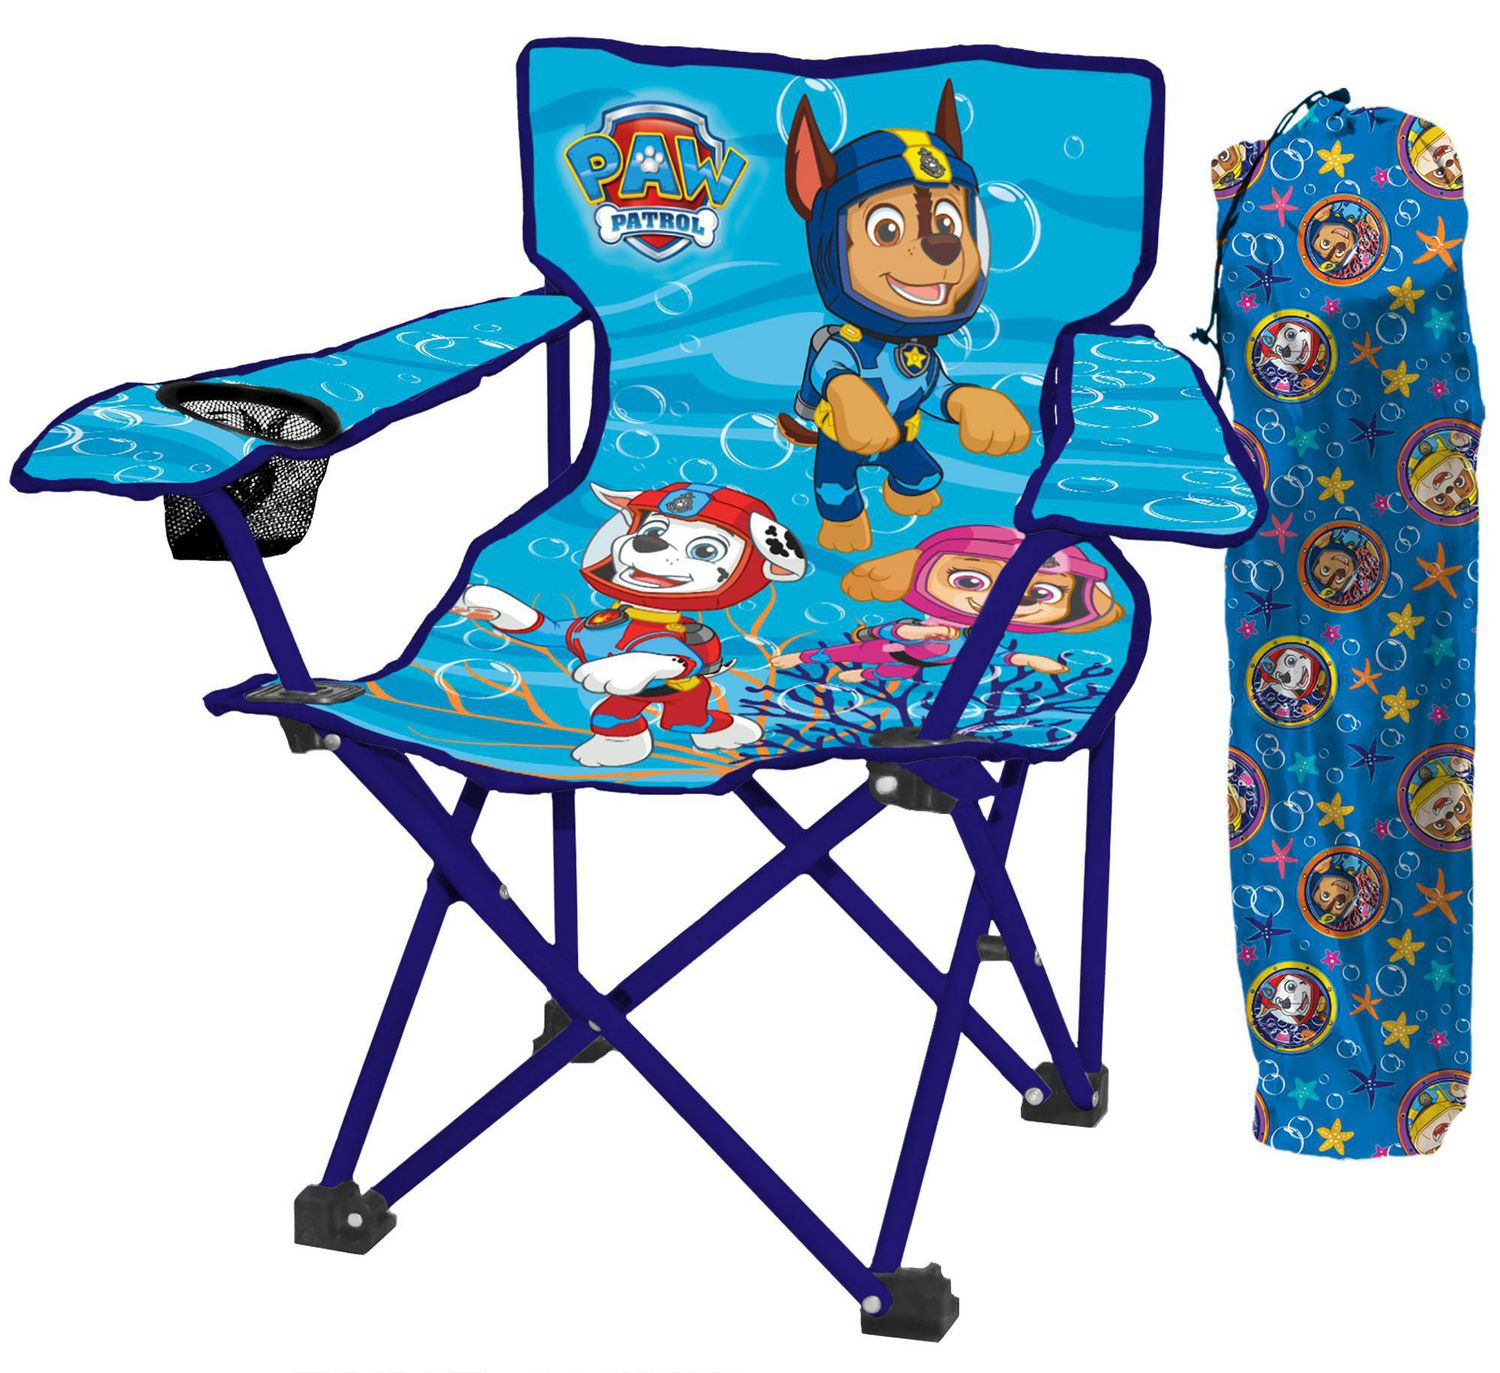 Paw Patrol Folding Camp Chair With Tote regarding dimensions 1500 X 1373